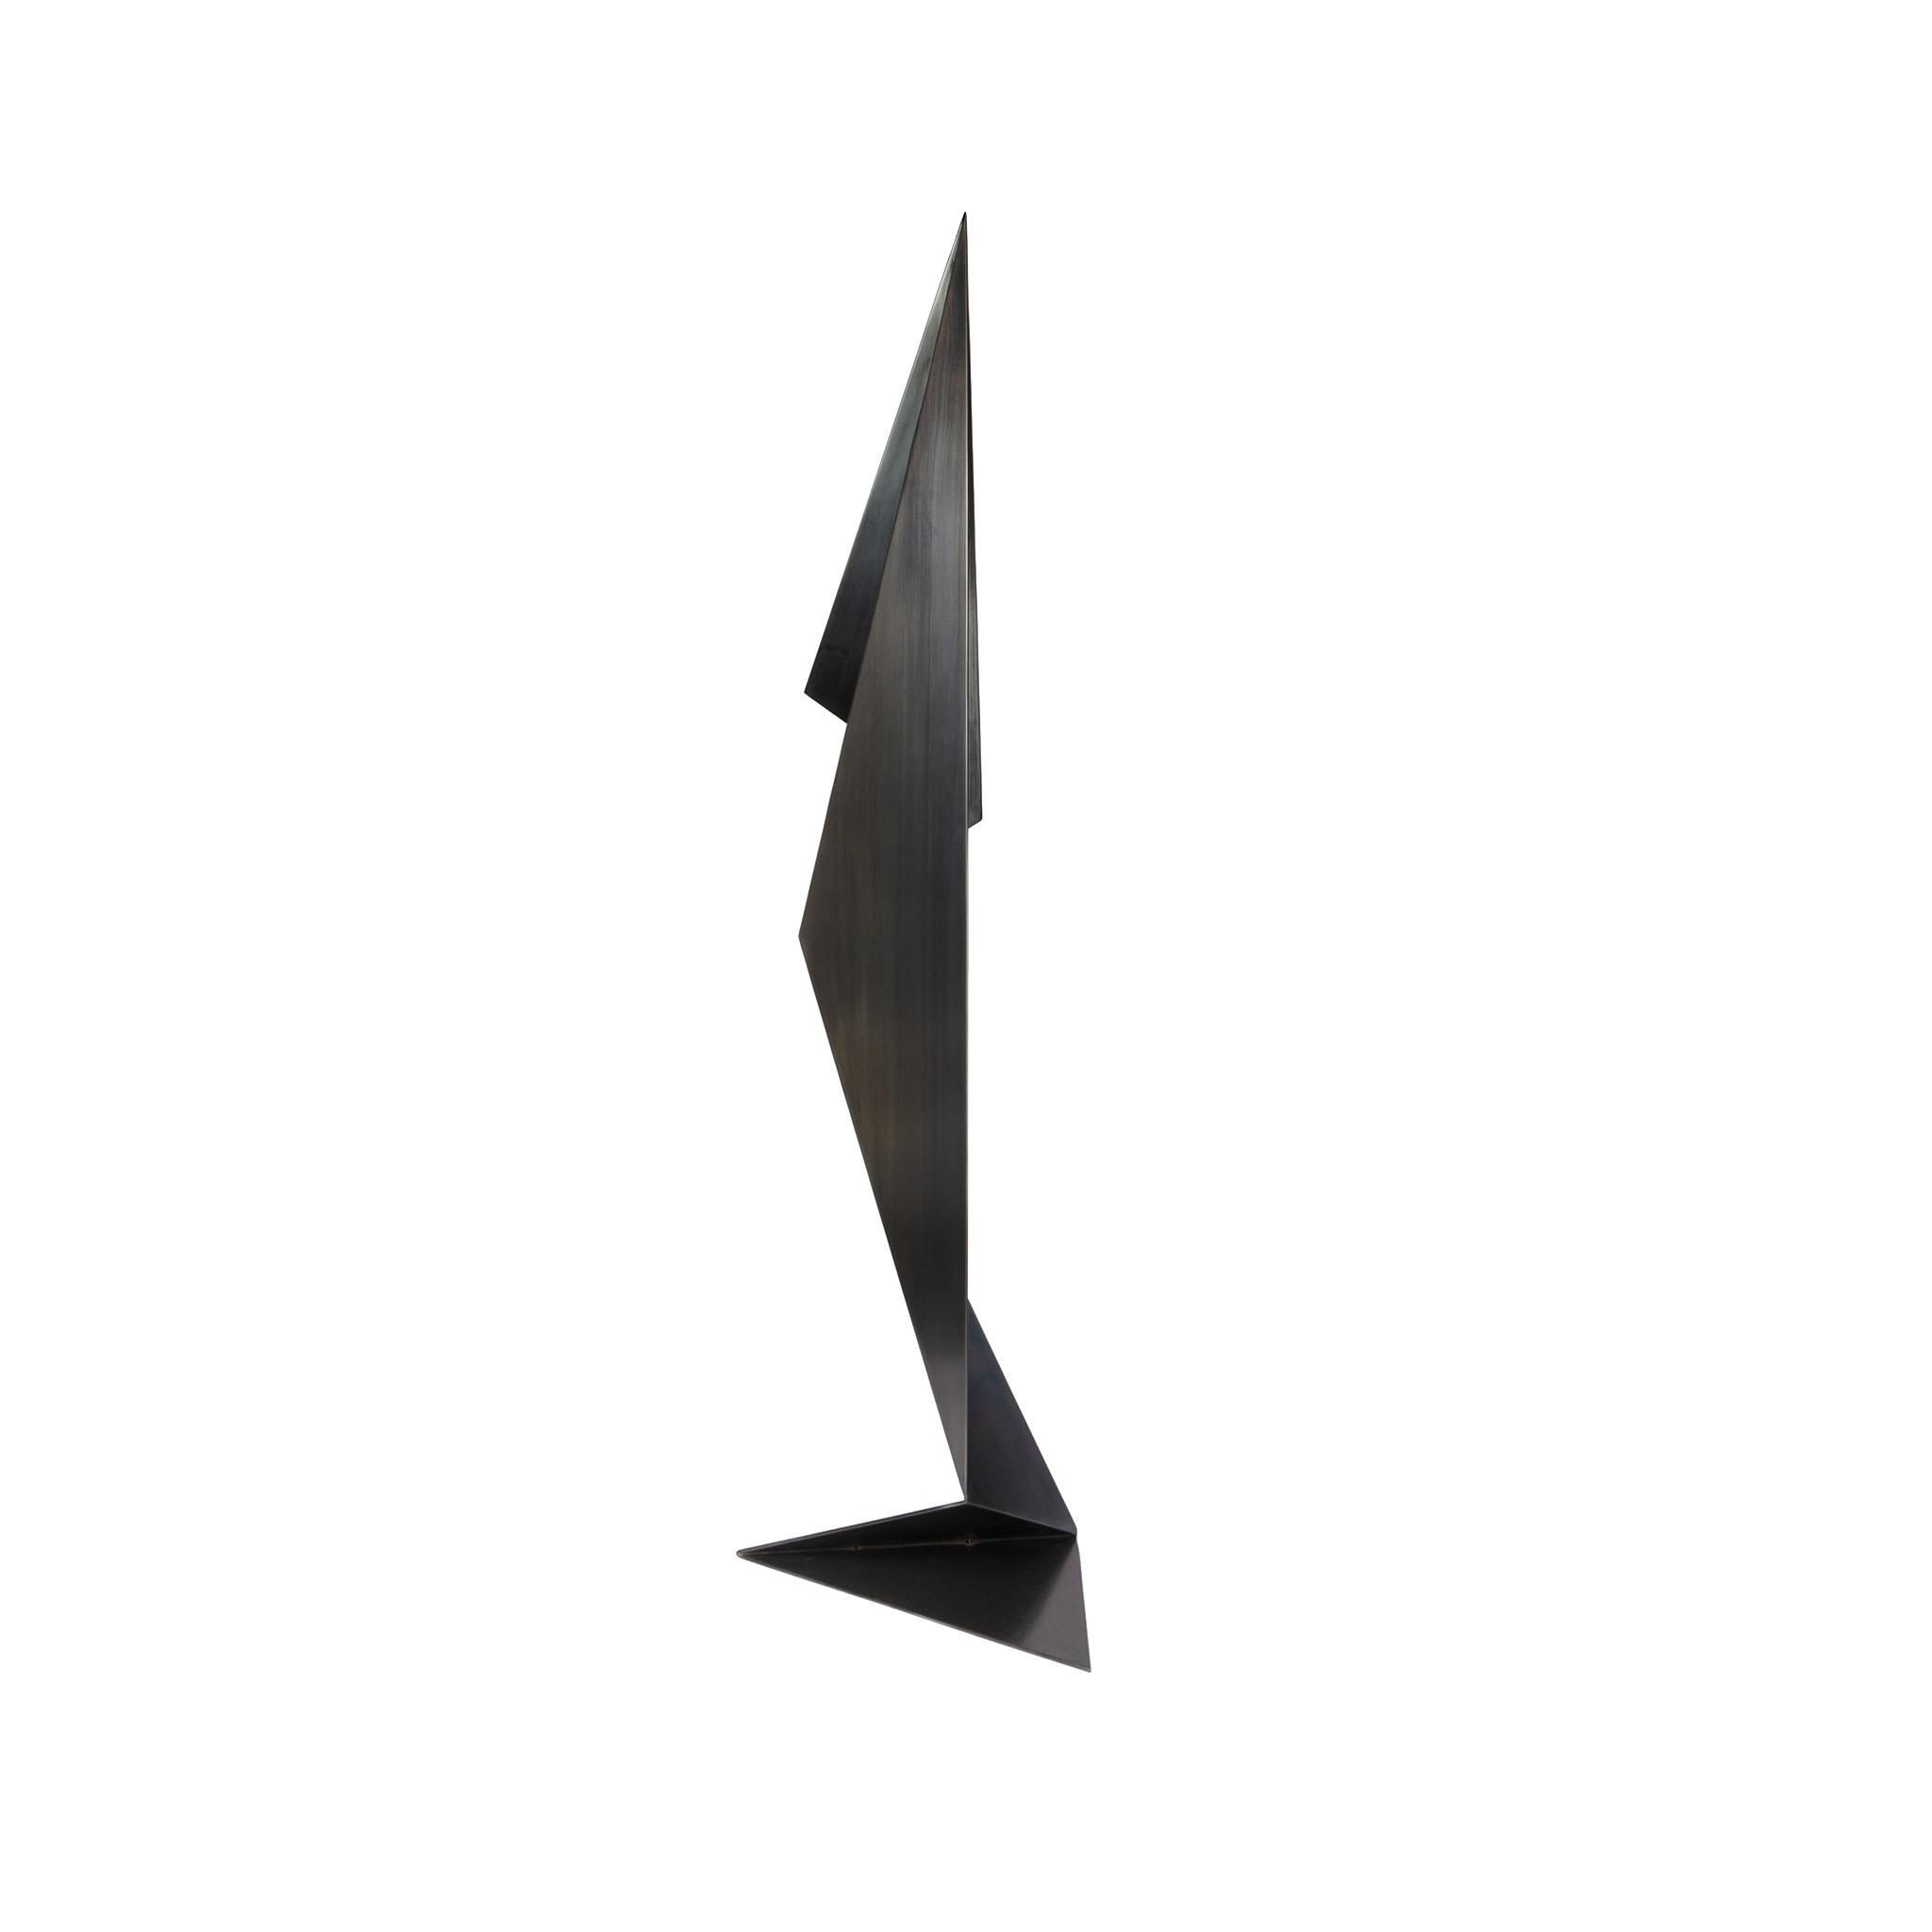 Currently, 1 in stock ships in 5 business days.

The origami Metal Sculpture is an abstraction of human proportions. The metal folding sculptural figure builds on the contradiction between its strong metal material and triangular form. Inspired by